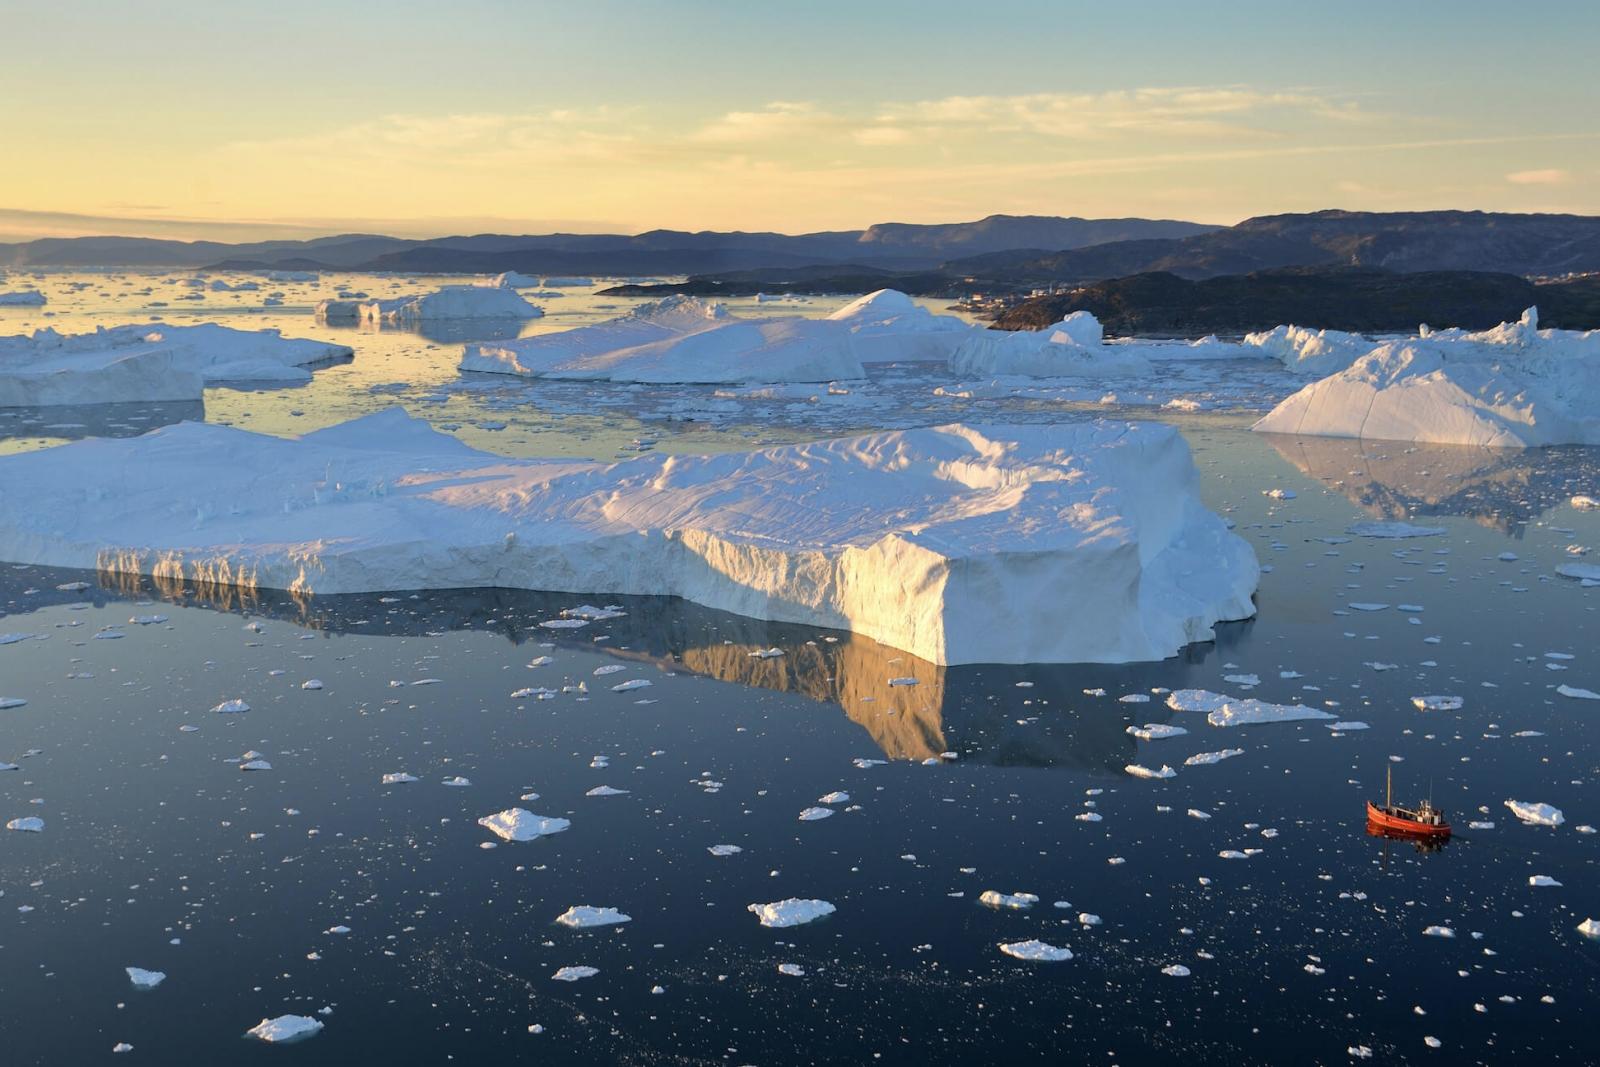 Ilulissat Icefjord from the air. By Rino Rasmussen